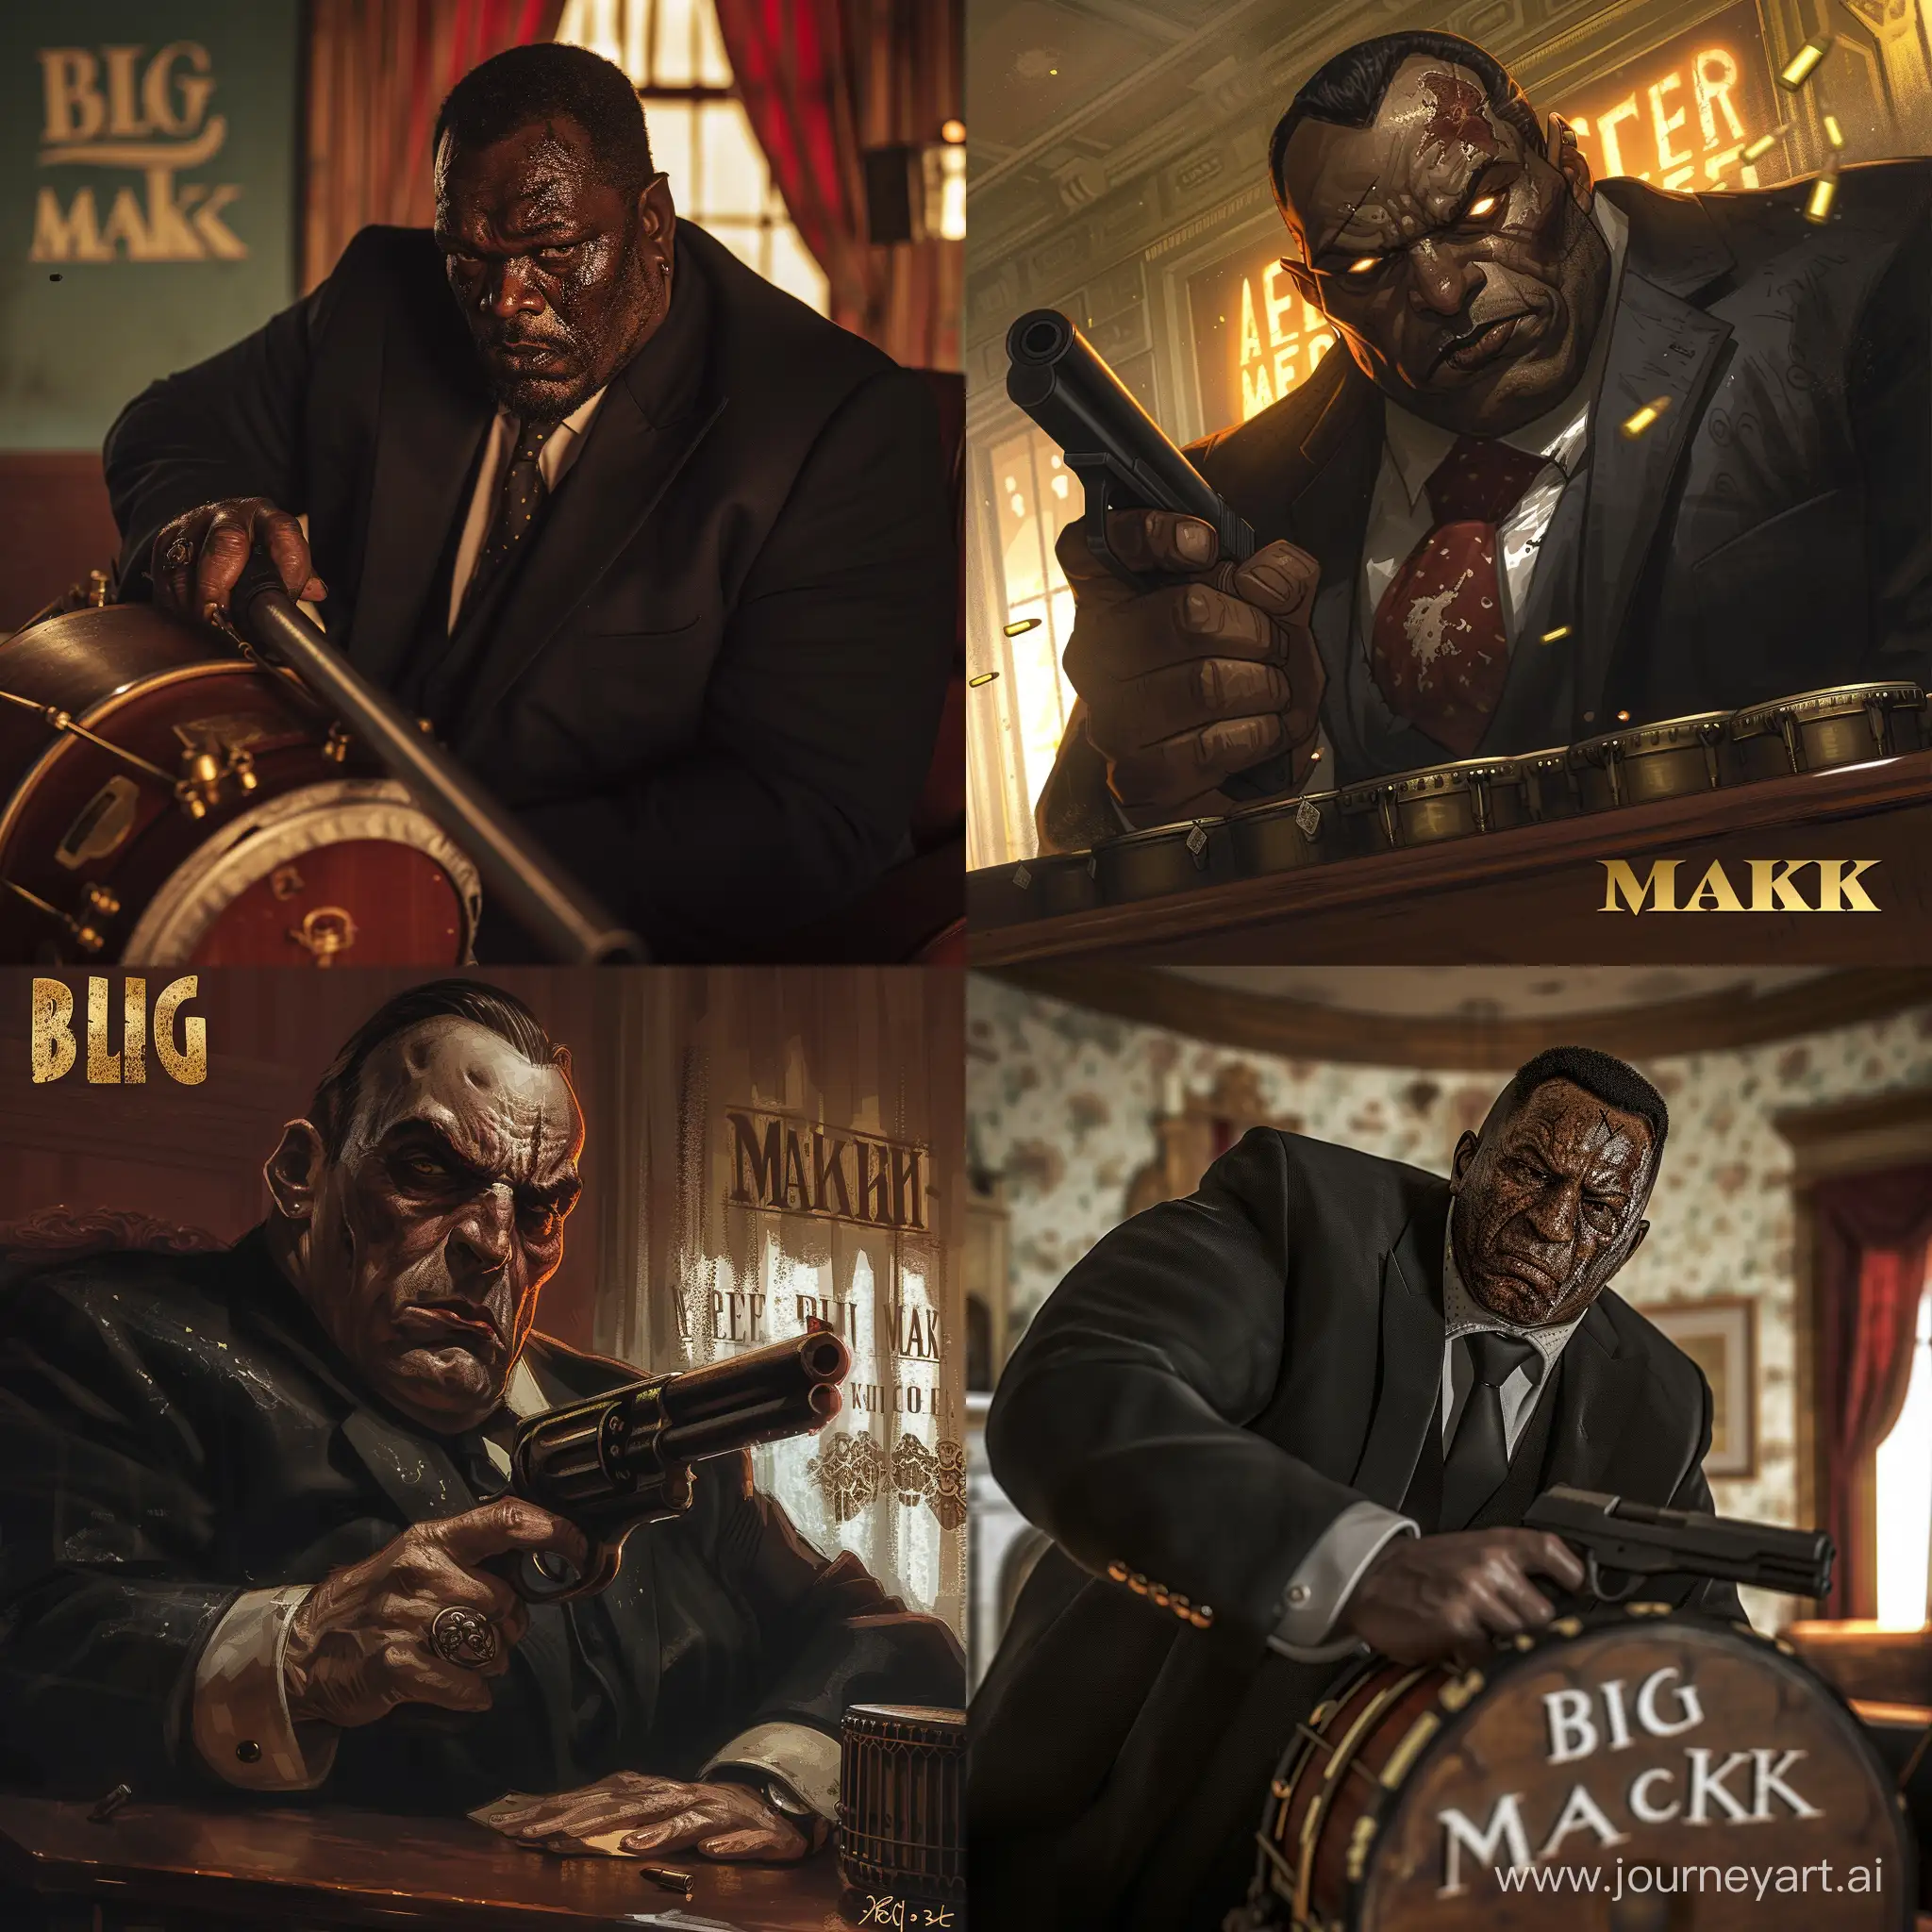 Mafia boss with a drum gun but he has a scar on his left eye and he’s in a godfather office and his name on desk says big Mack 
